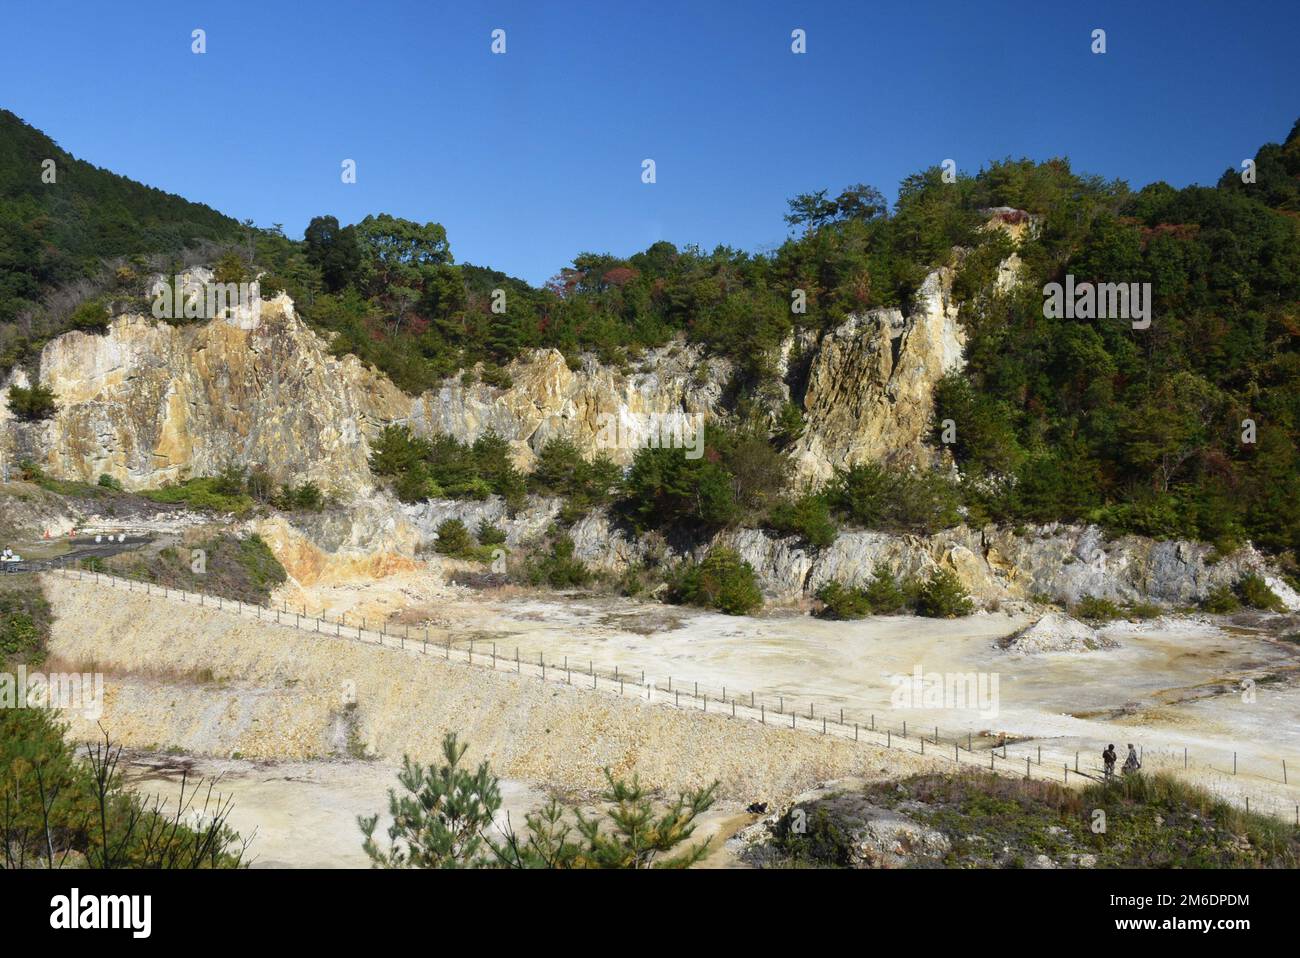 Izumiyama Kaolin Quarry in Arita, Kyushu Island. The first site discovered in Japan for kaolin, the raw material used to make porcelain clay. Stock Photo